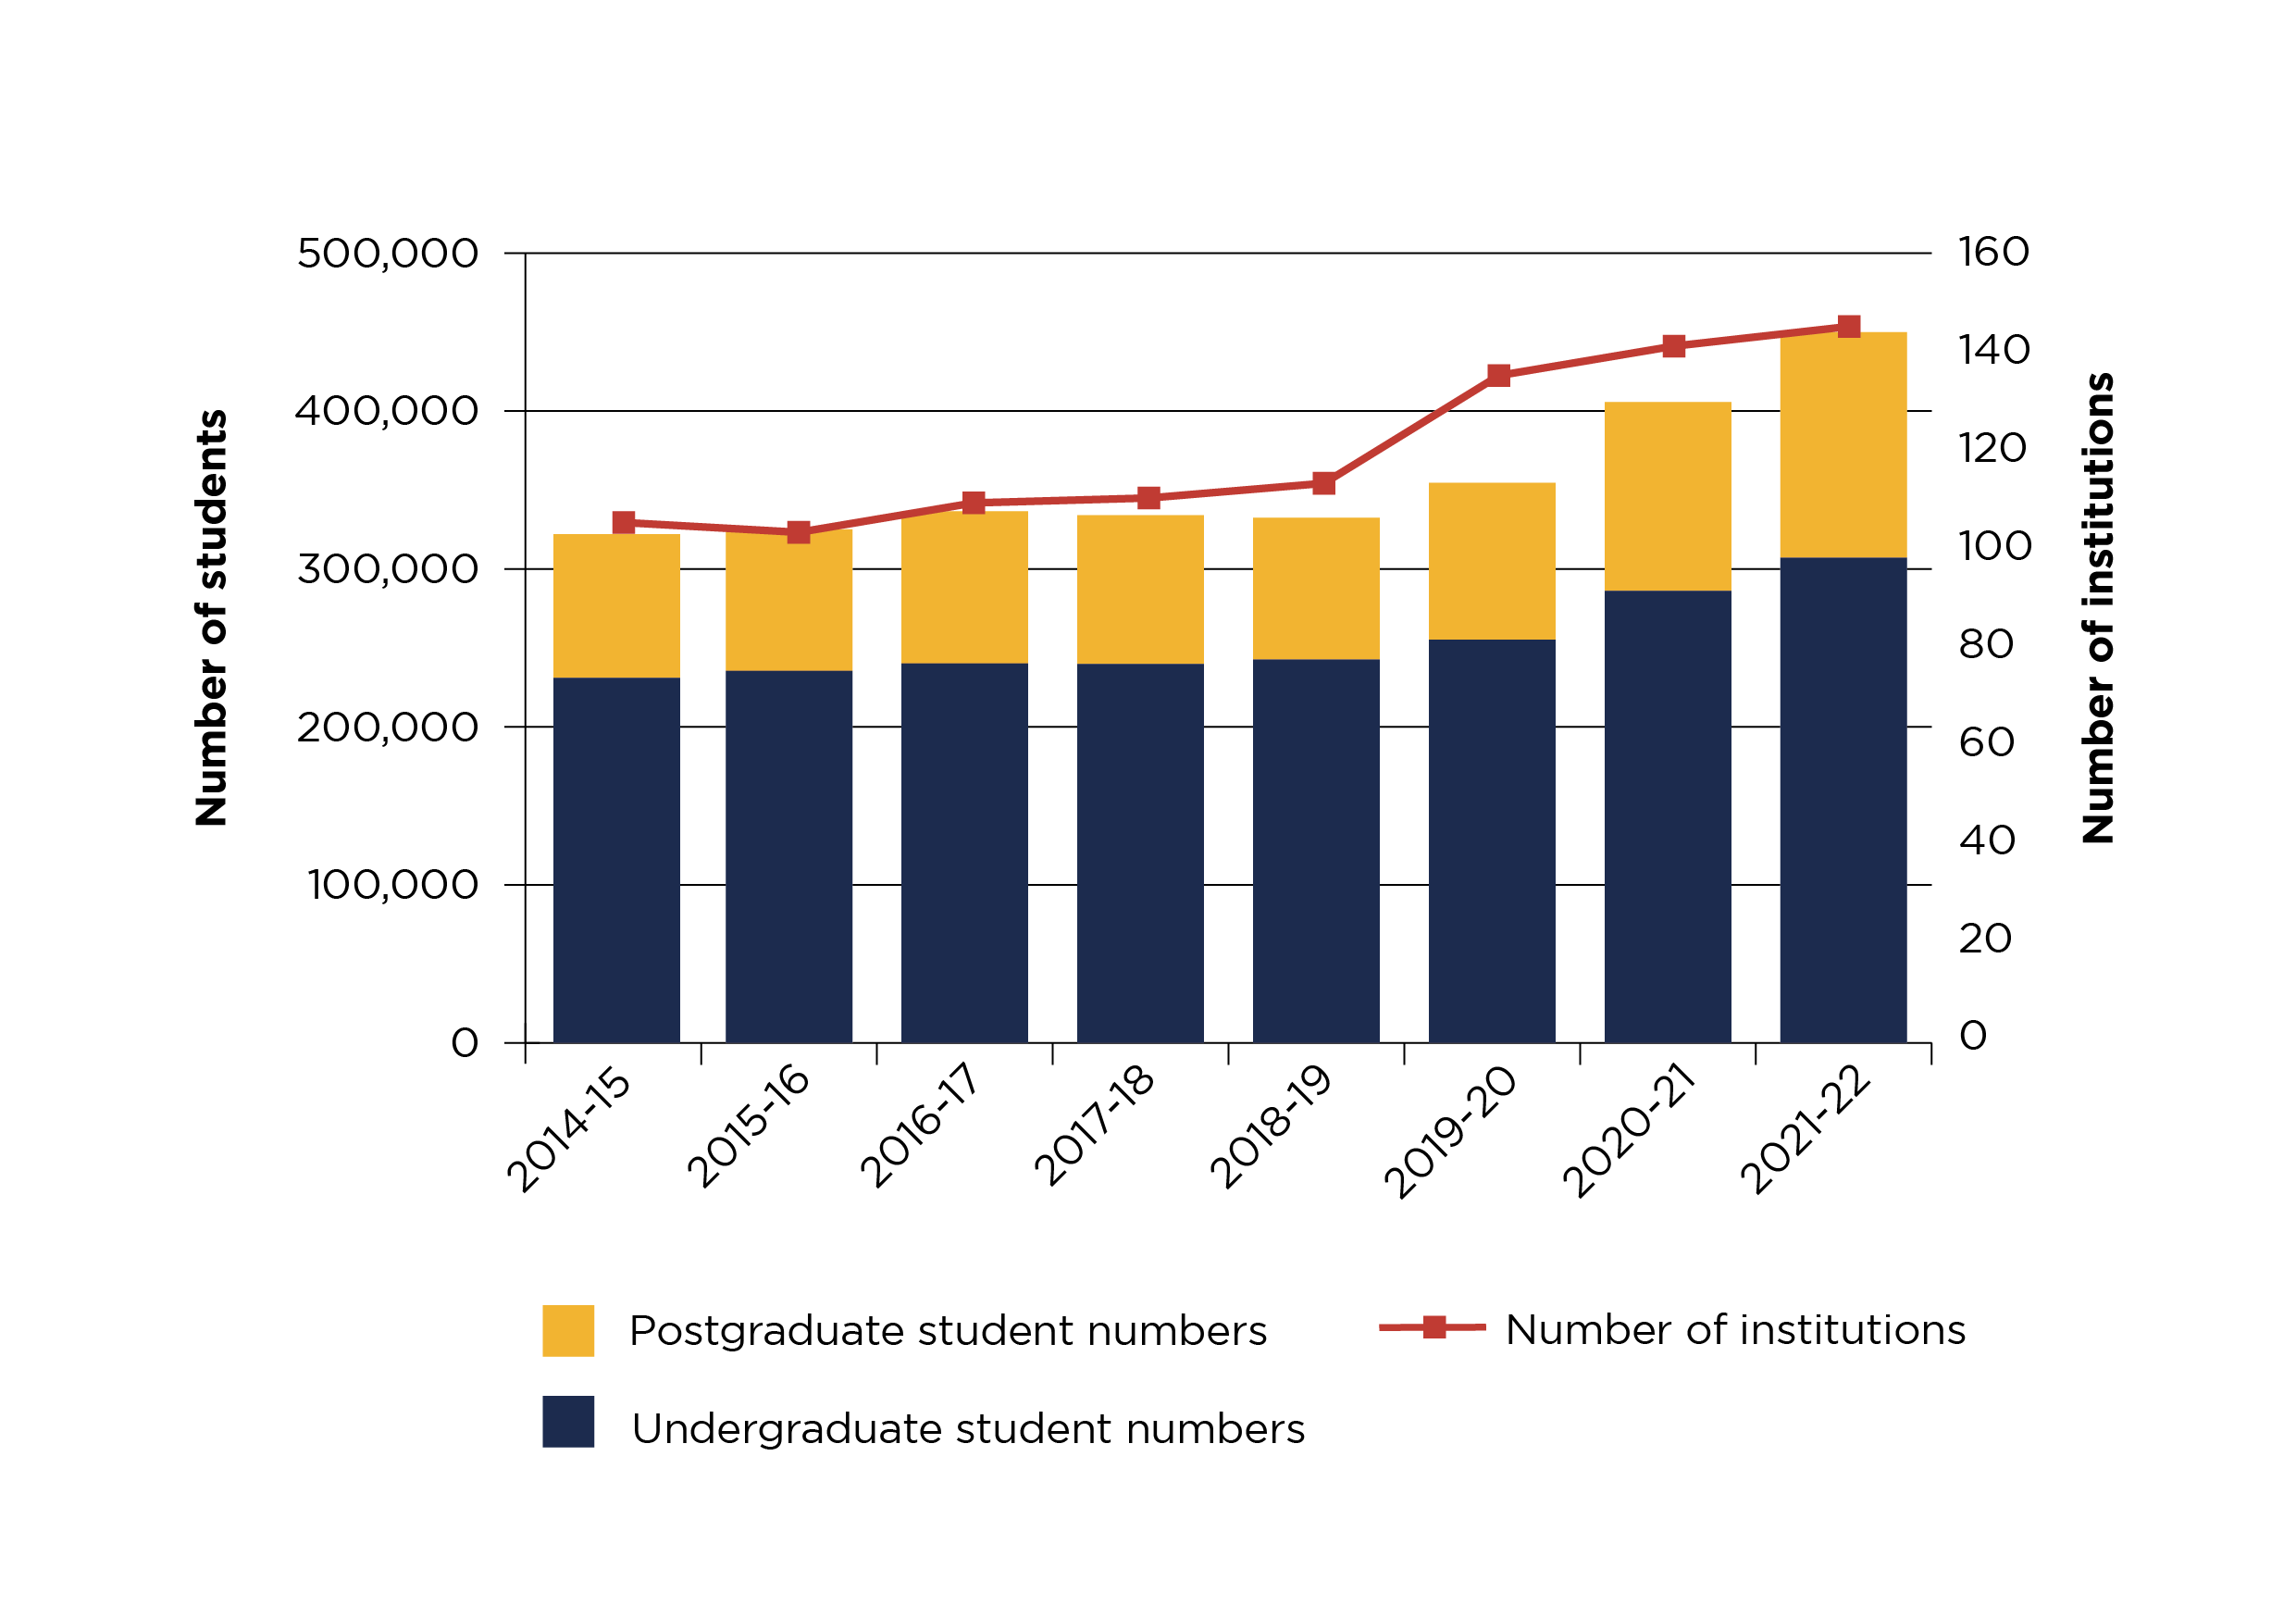 Figure 1 is a stacked bar chart showing numbers of postgraduate and undergraduate TNE students from 2014-15 to 2021-22, overlaid with a line graph showing the number of institutions involved in providing TNE over the same period. All the quantities remain steady with minimal growth between 2014-15 and 2018-19, before growing more noticeably over the remaining three years.